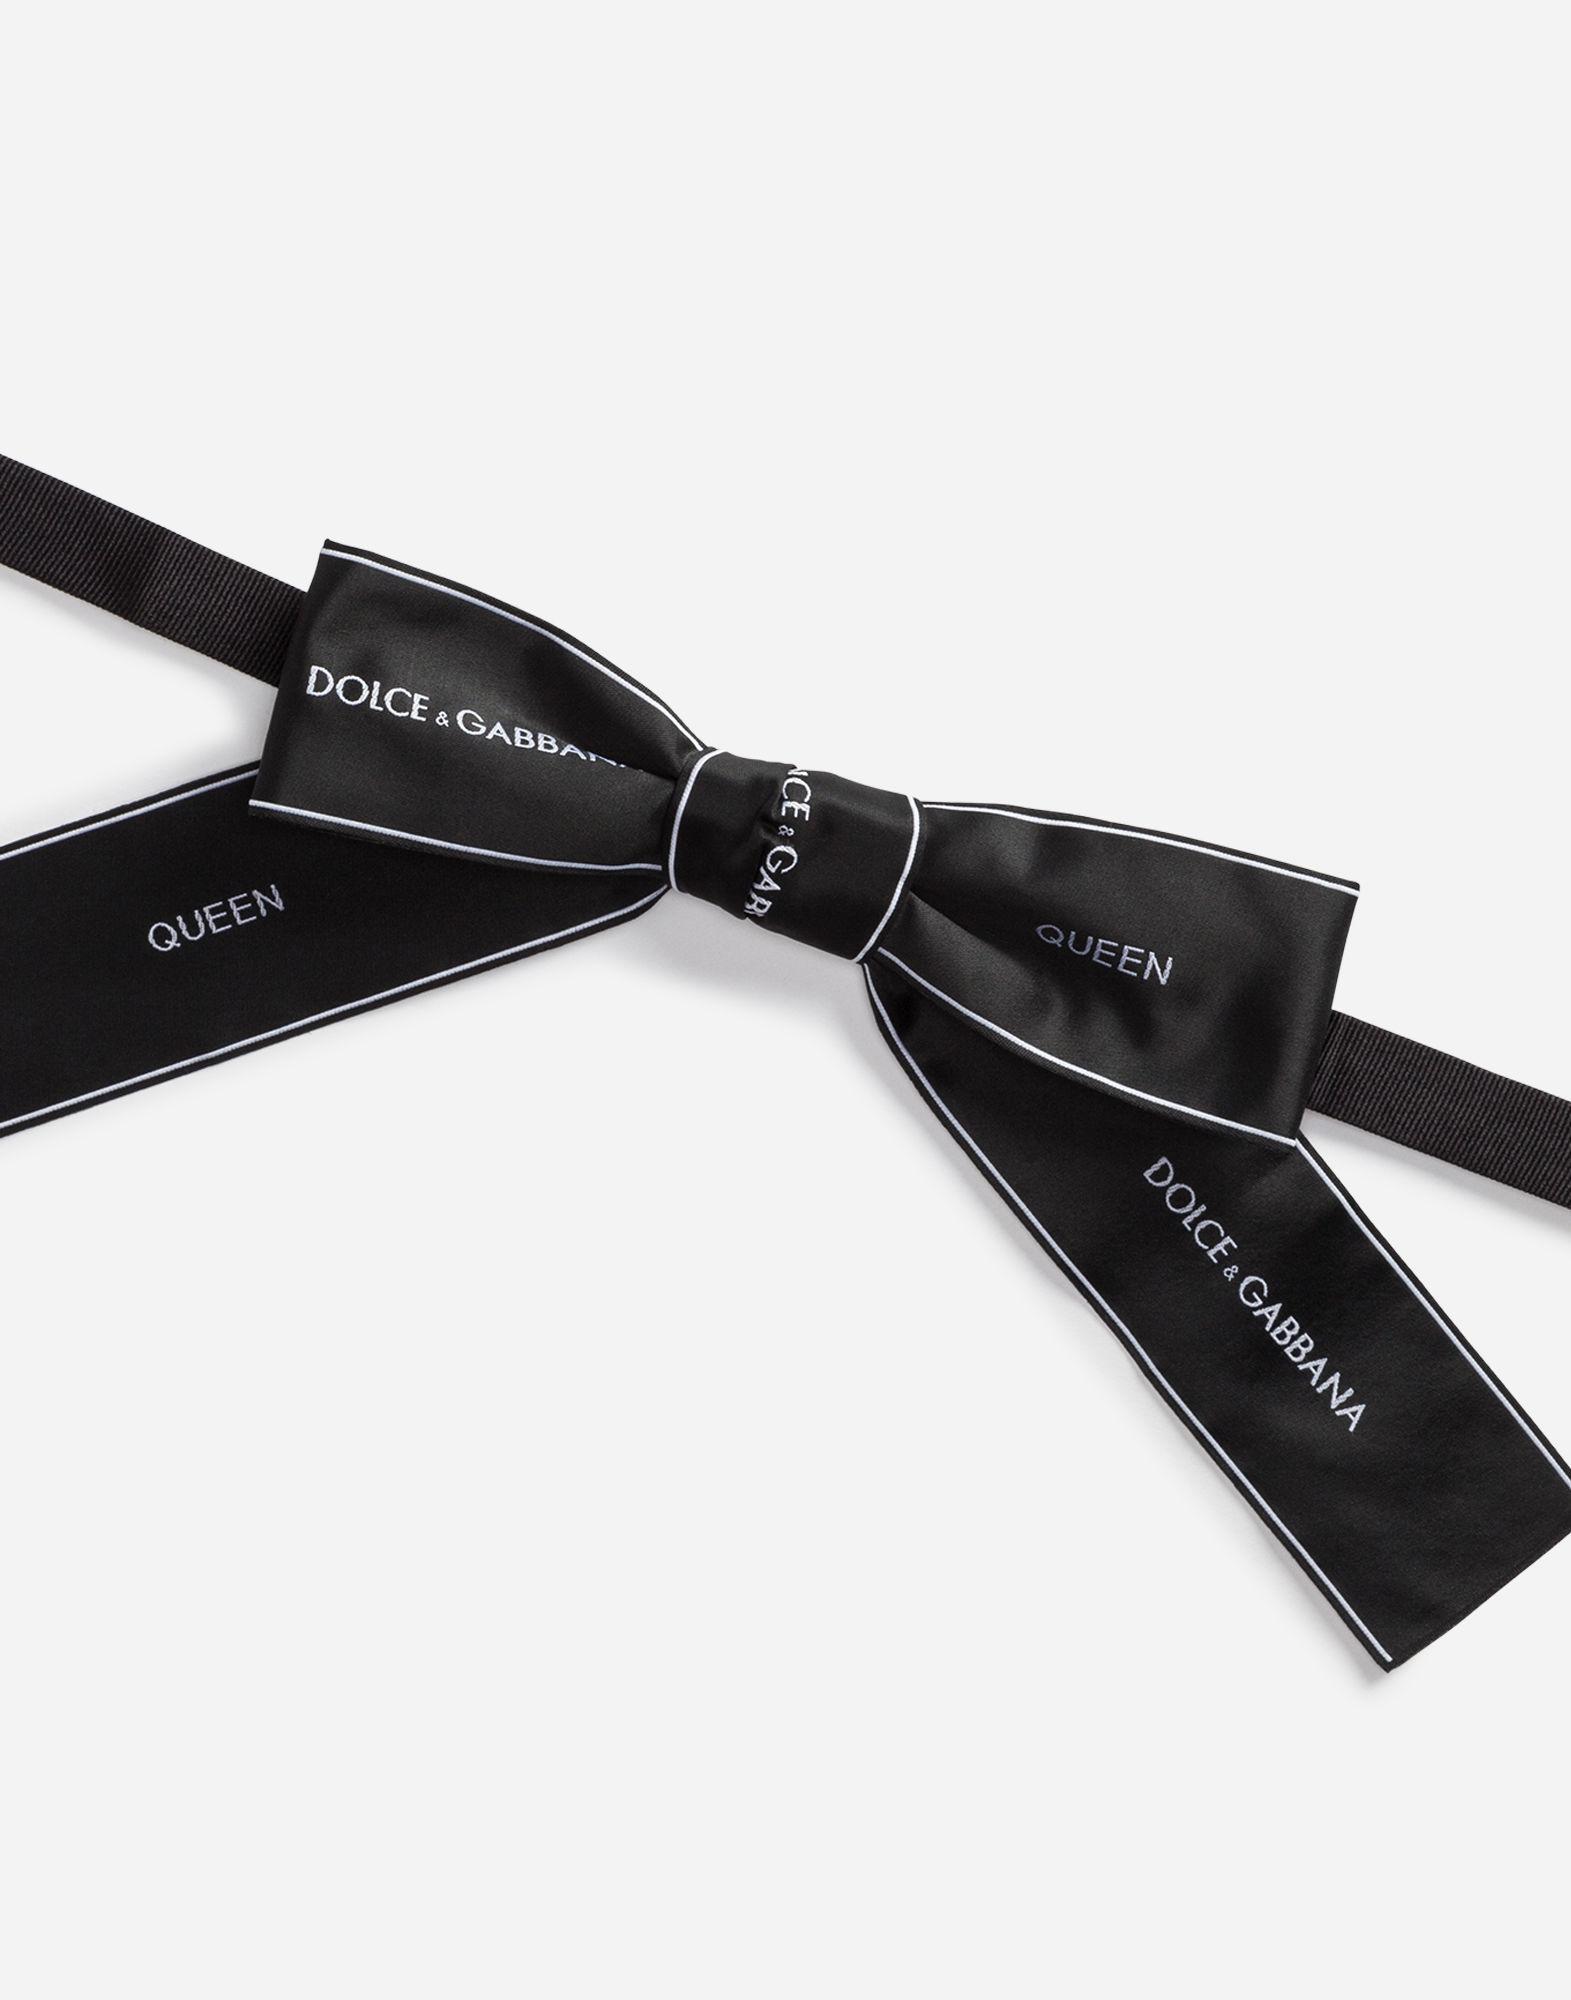 dolce and gabbana bow tie